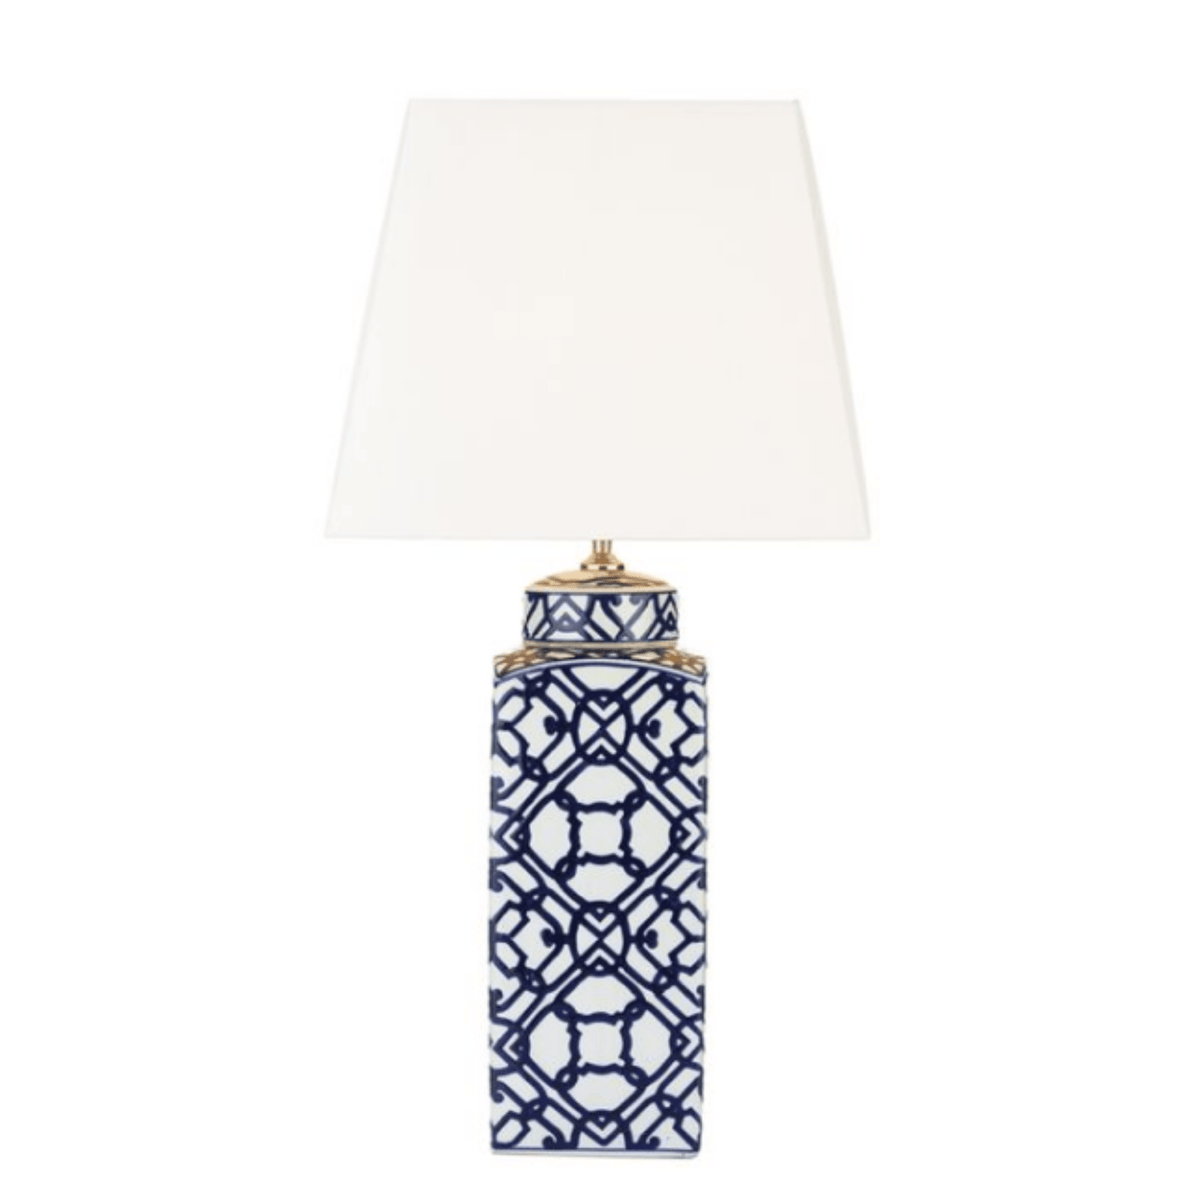 Mystic Table Lamp Blue And White Base Only - Cusack Lighting